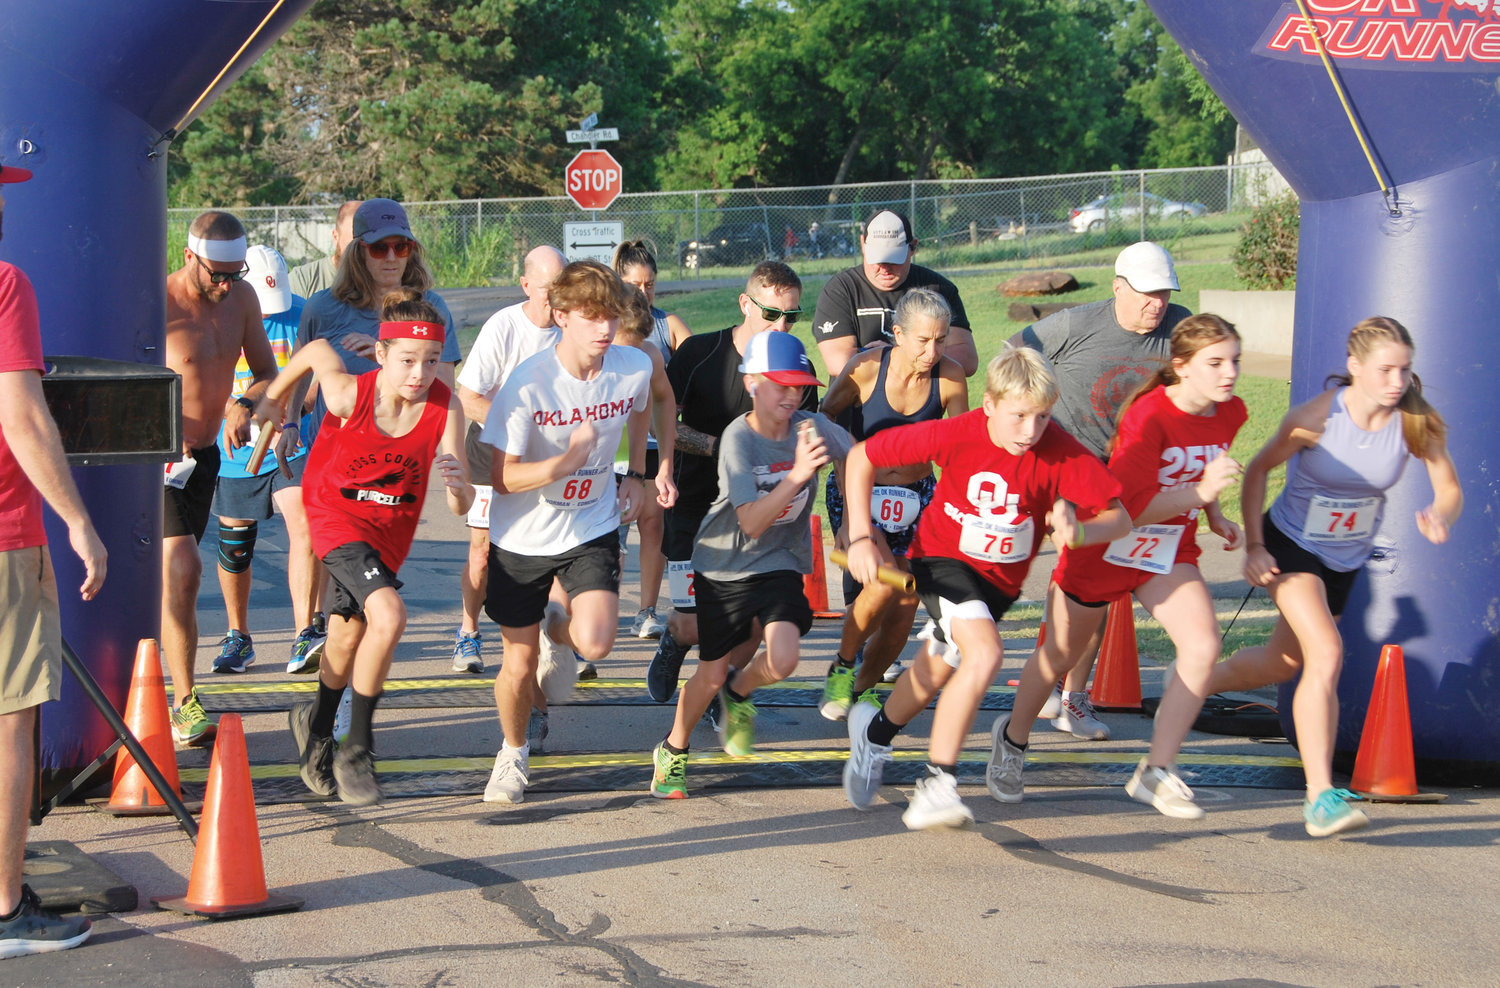 The start of the 25th annual Purcell Lake Run near the pavilion at the Purcell City Lake last Saturday morning.